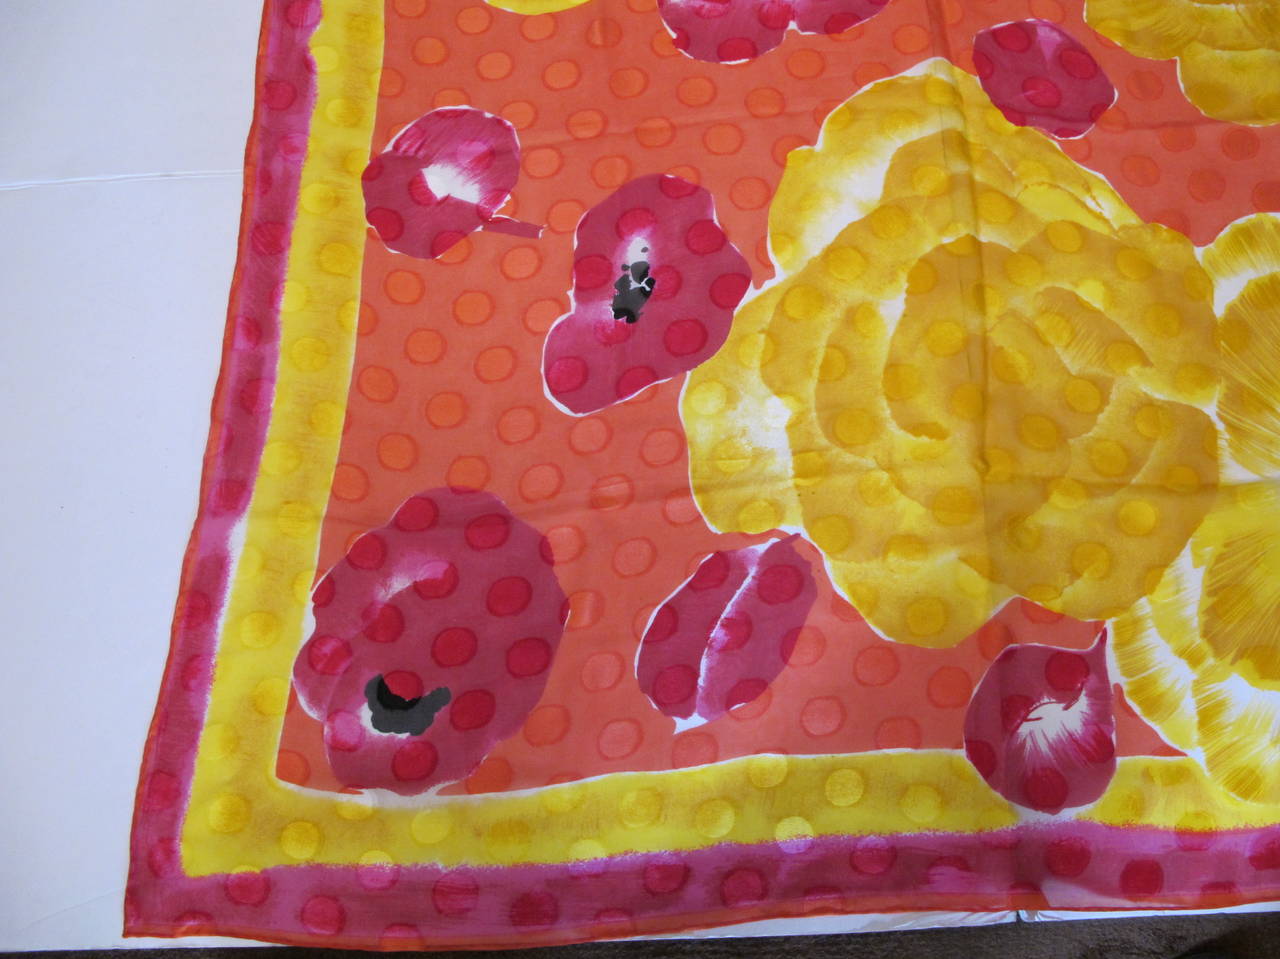 Flowers are embedded in a sea of polka dots. Bright orange, yellow, golden, red, magenta, black and white hand rolled hem scarf. It was owned by a Hillsborough, California Grande Dame and donated to Helpers. This scarf brings joy to the soul.